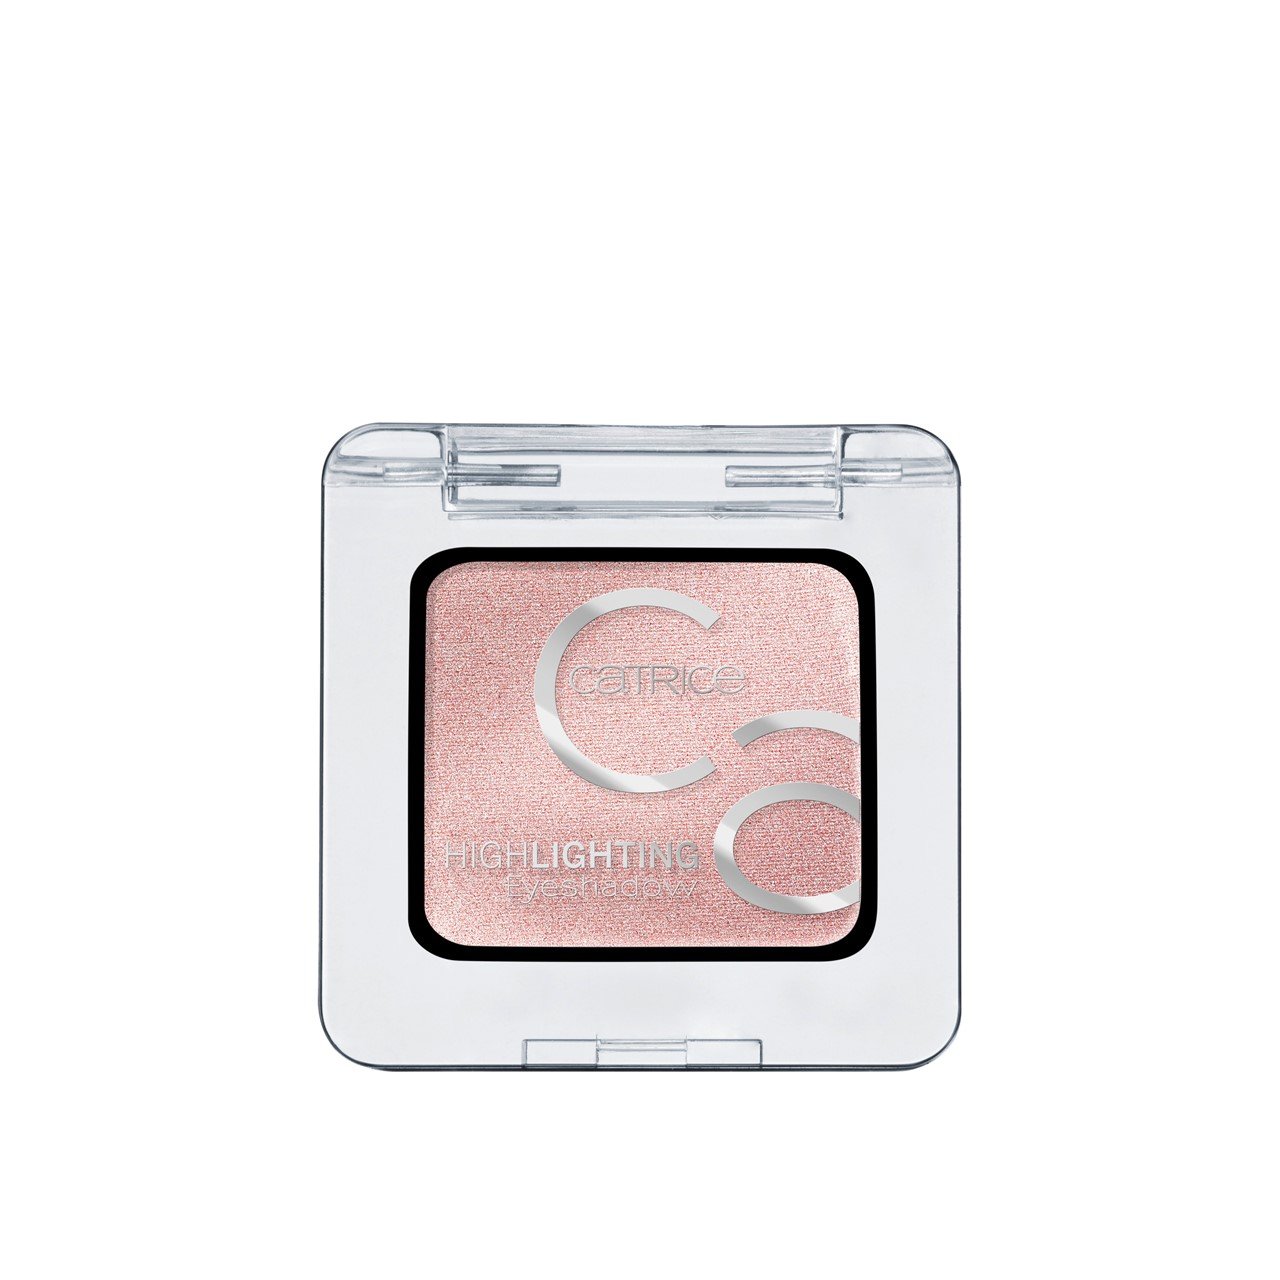 Highlighting Powder by CATRICE COSMETICS, Color, Cheek, Highlighter